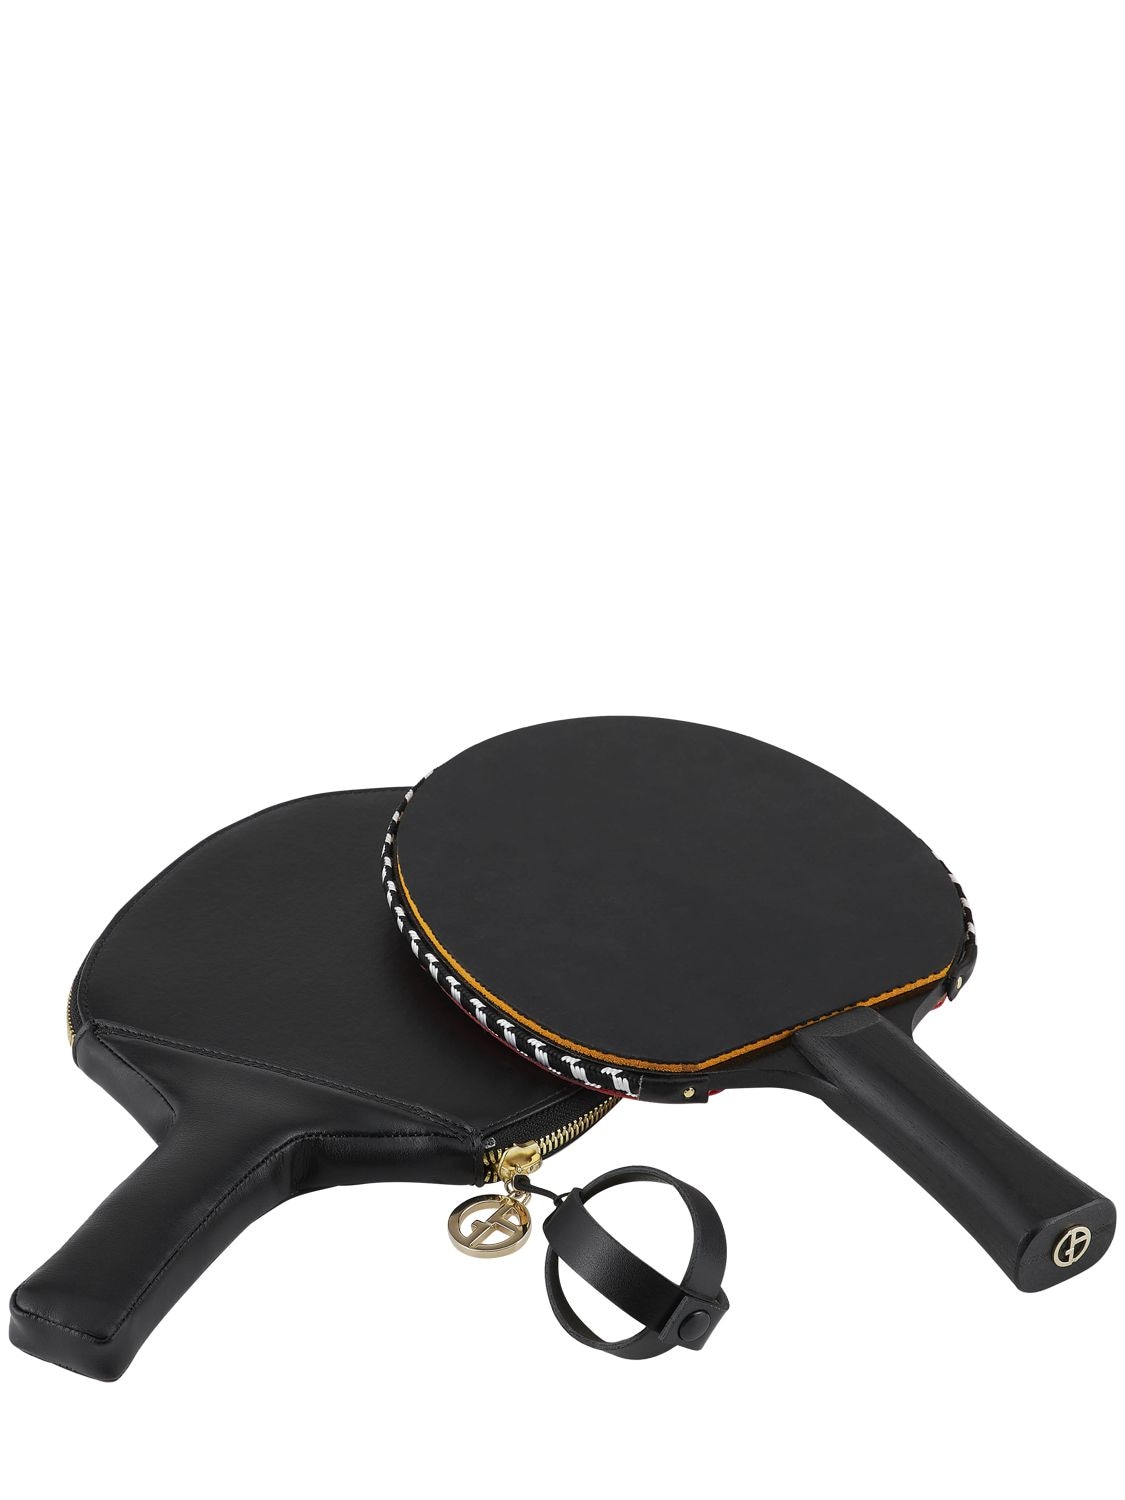 Armani/casa Plage Ping Pong Paddle In Black,gold